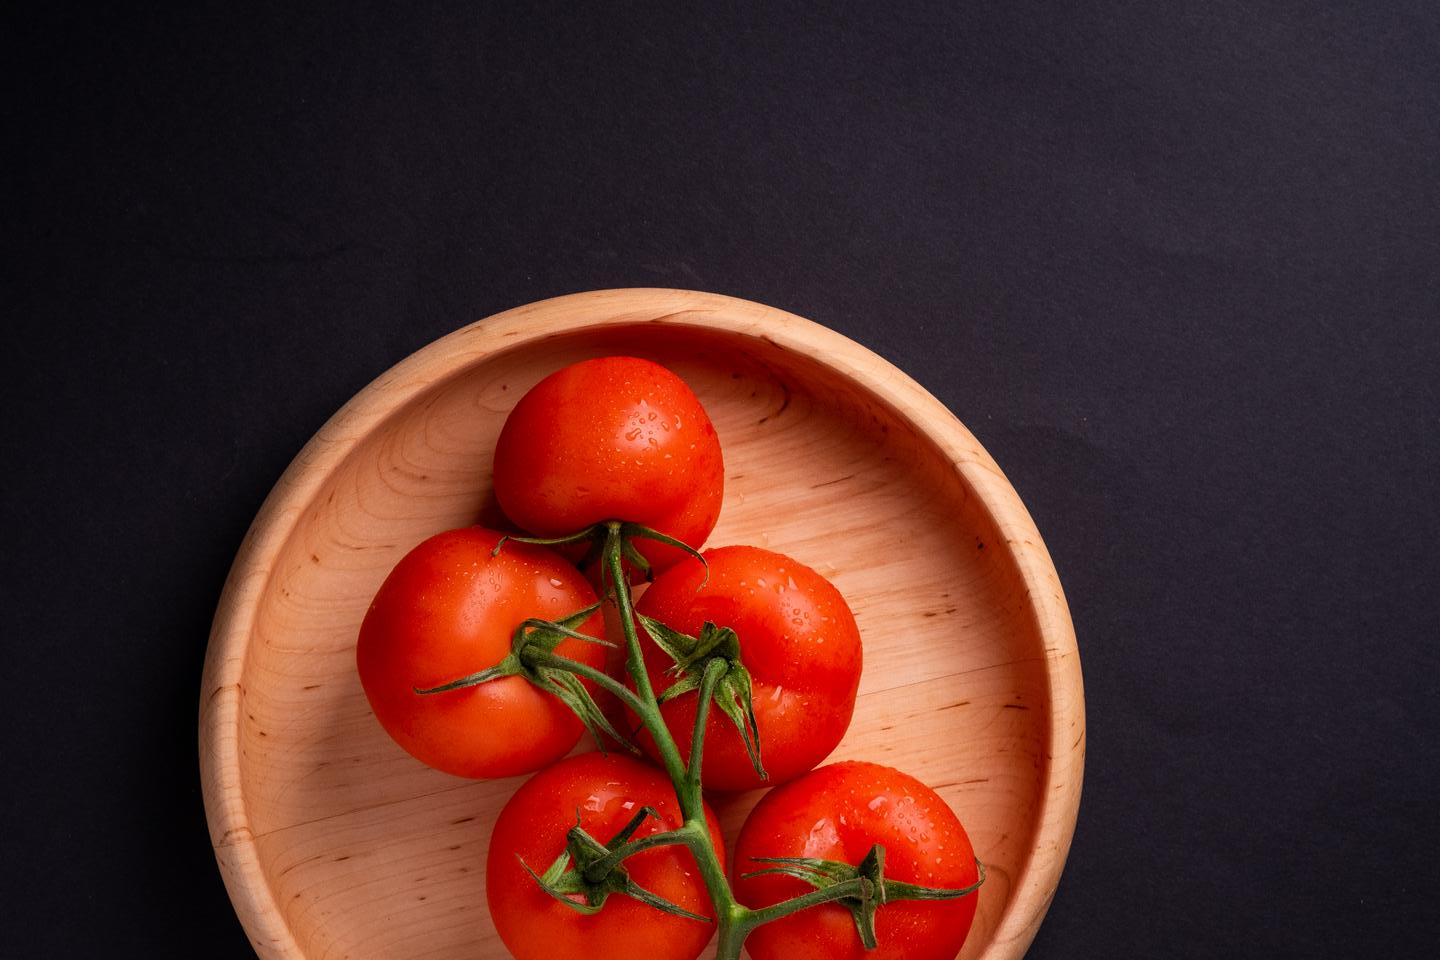 🔭 Are You Intelligent Enough to Pass This Challenging Science Quiz? Let’s Find Out Tomatoes